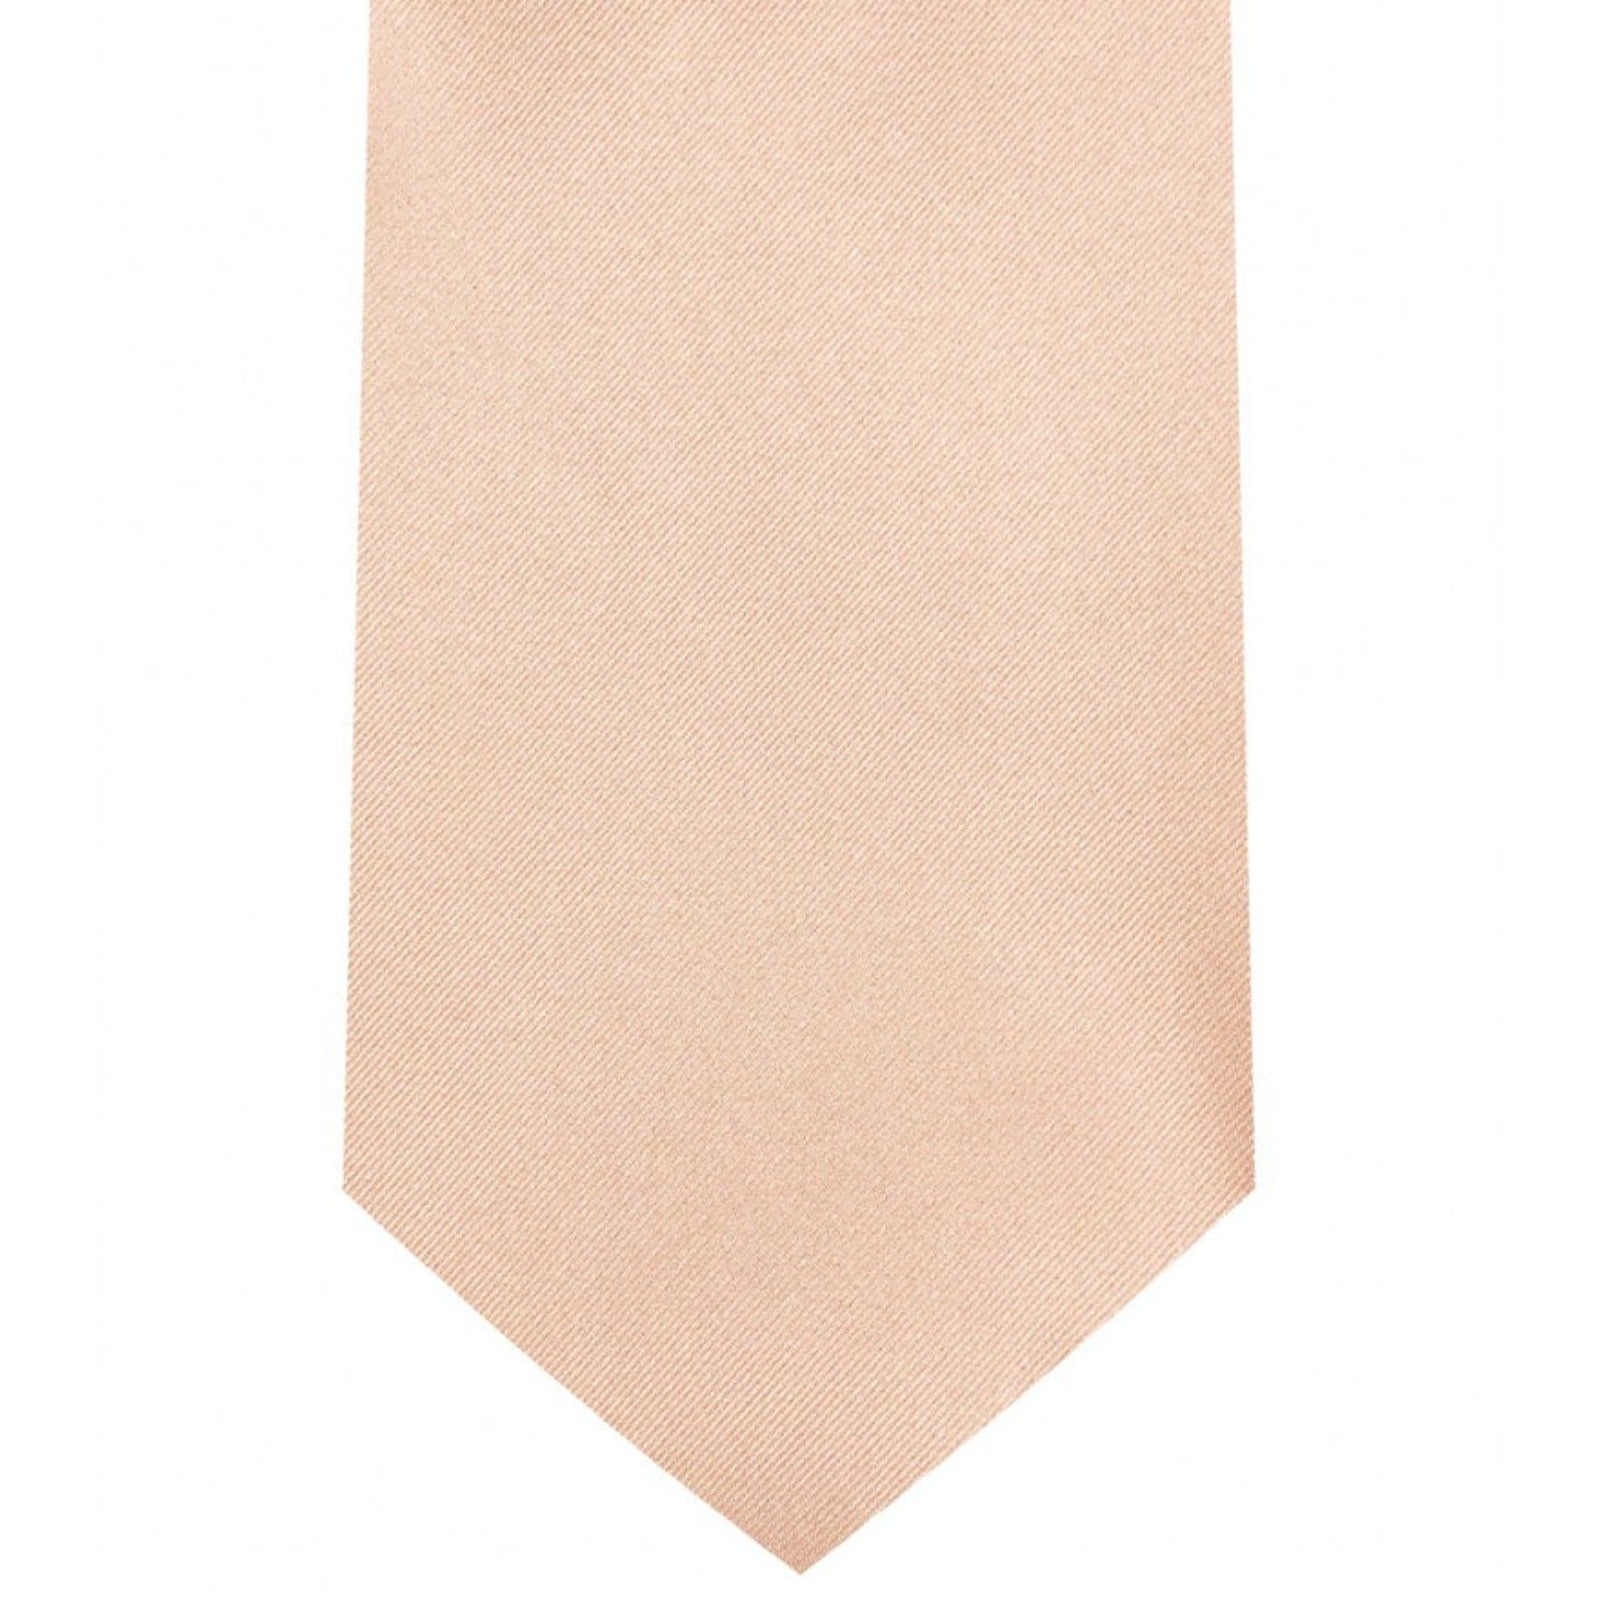 Classic Blush Tie Regular width 3.5 inches With Matching Pocket Square | KCT Menswear